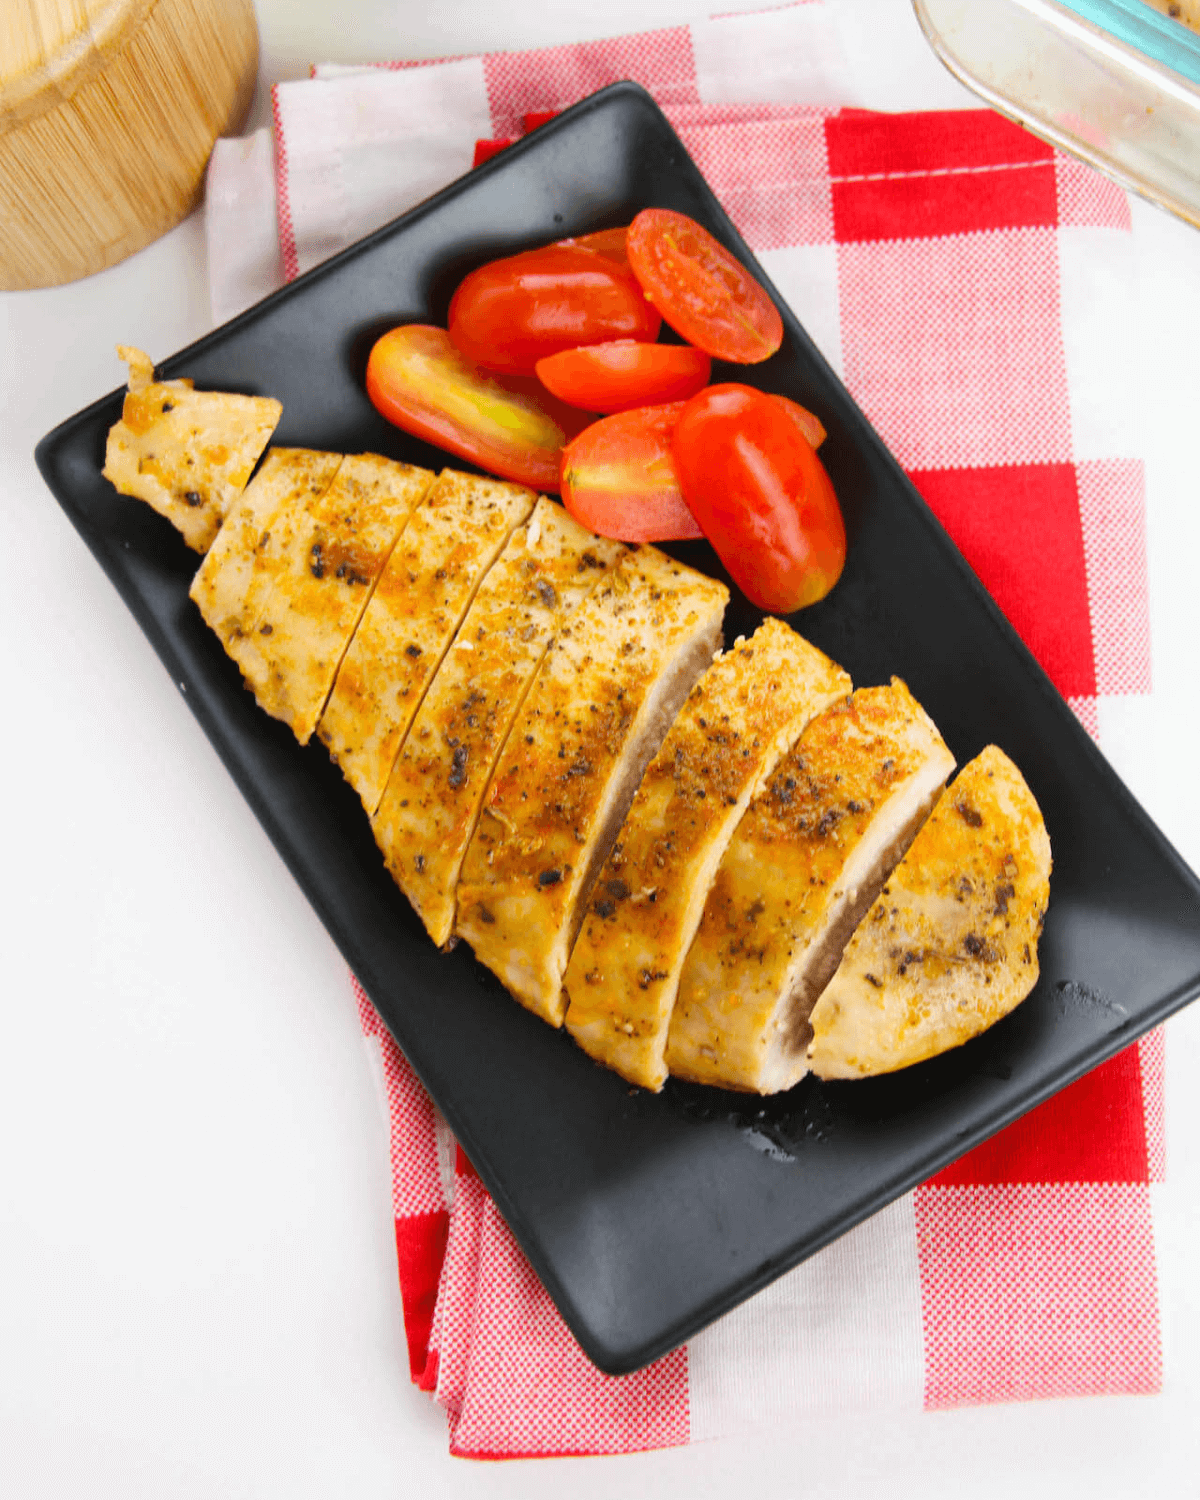 Baked chicken cutlets on a black plate with tomatoes.